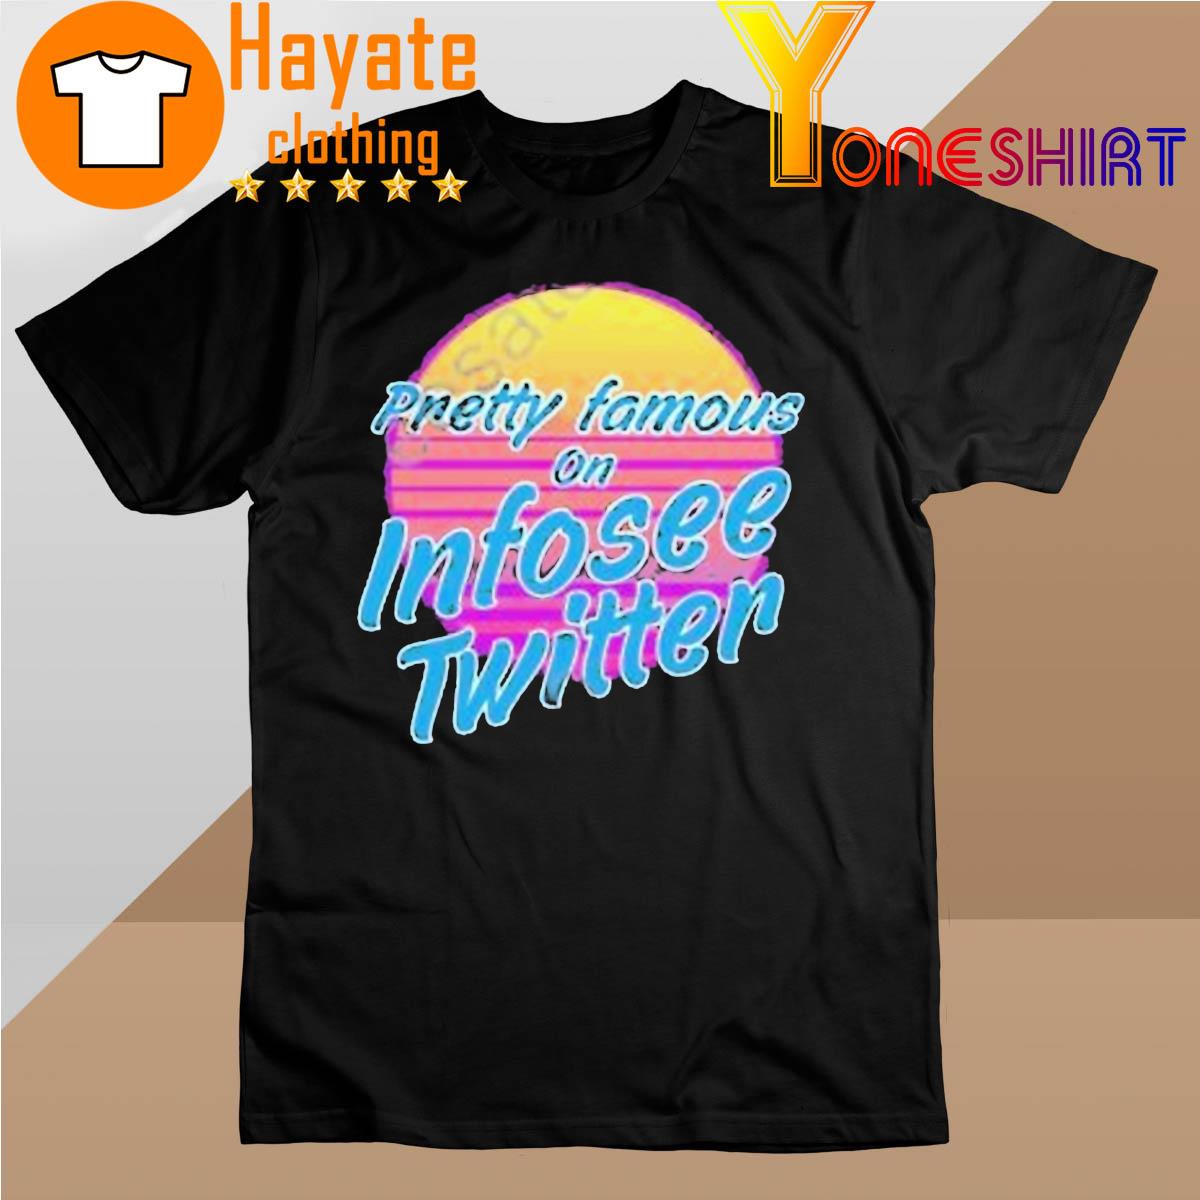 Pretty Famous On Infosee Twitter shirt